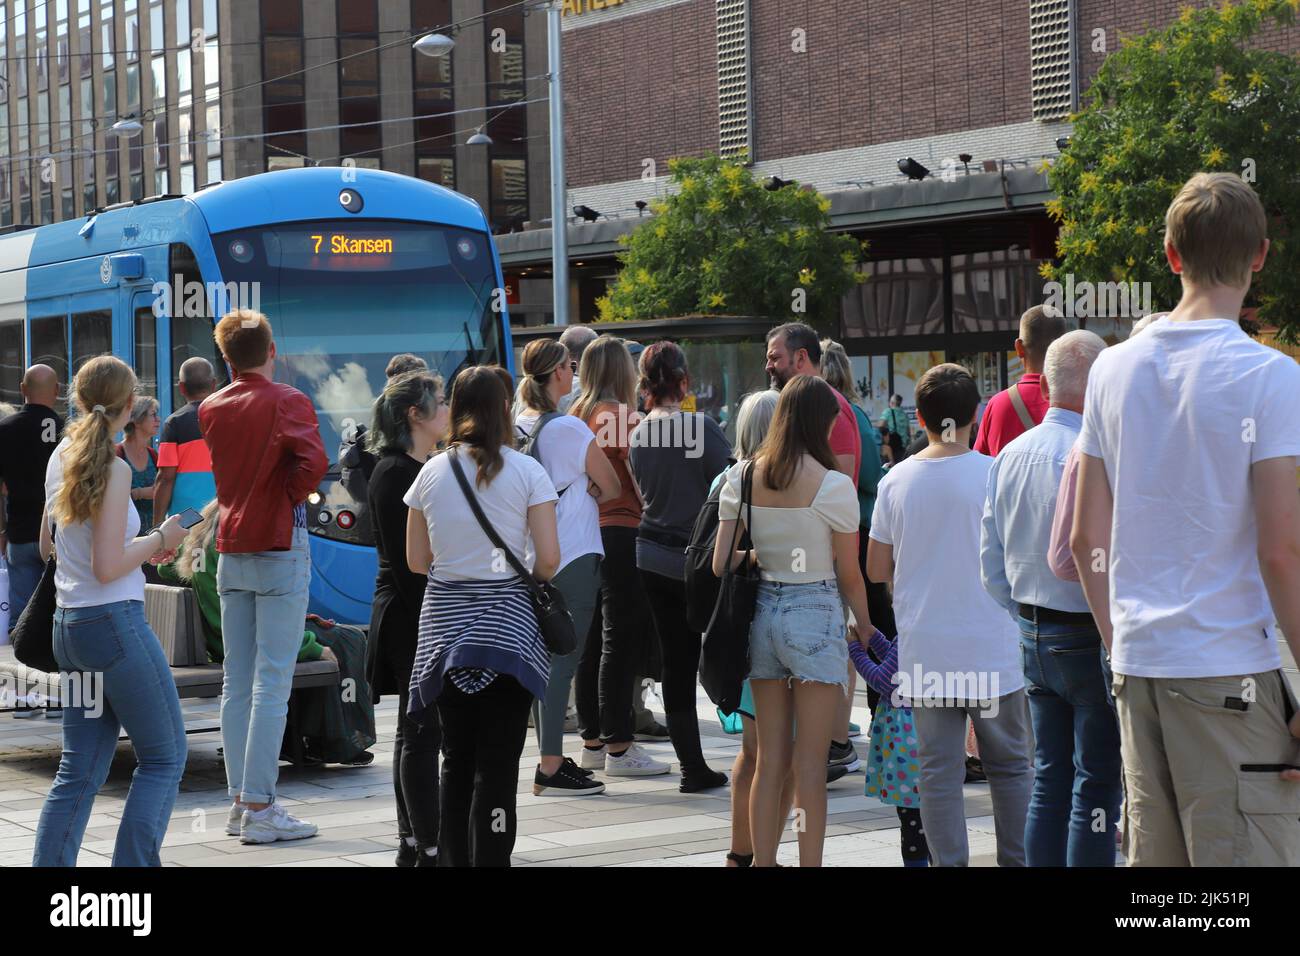 Stockholm, Sweden - July 29, 2022: People waiting at the crowded tram stop T-Centralen for the public transportation tram on line 7 to the Skansen out Stock Photo